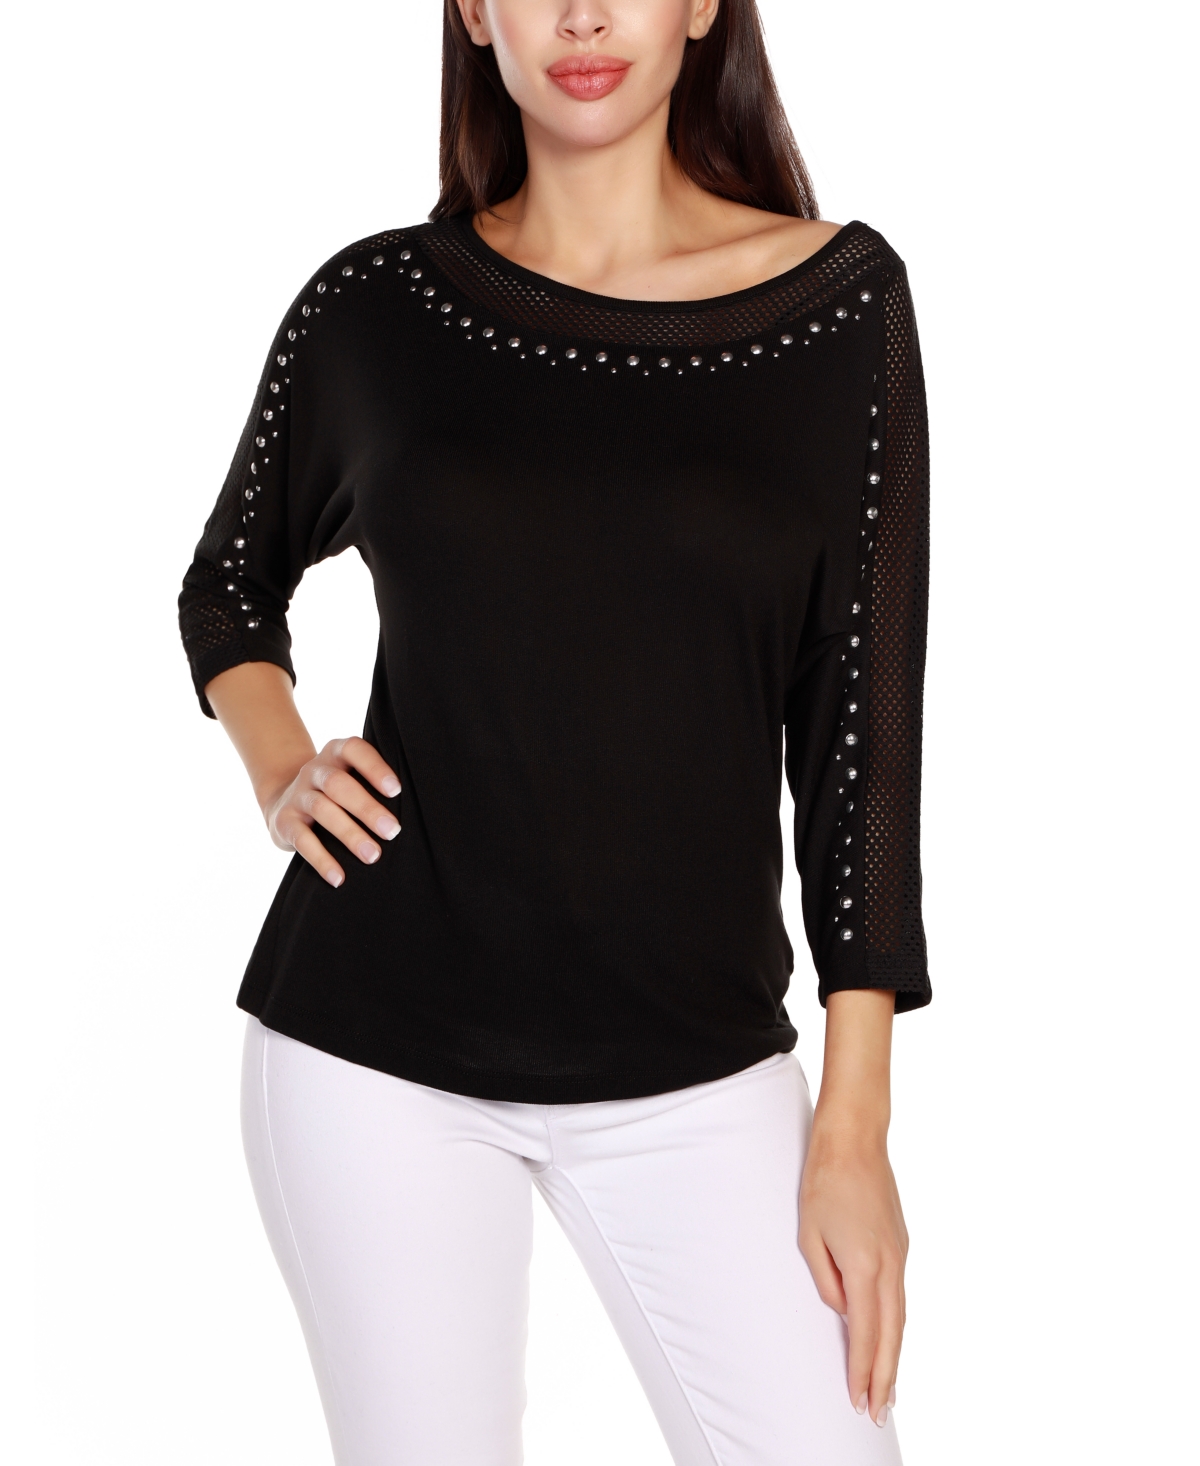 Women's Embellished Dolman with Mesh Inset Top - Black